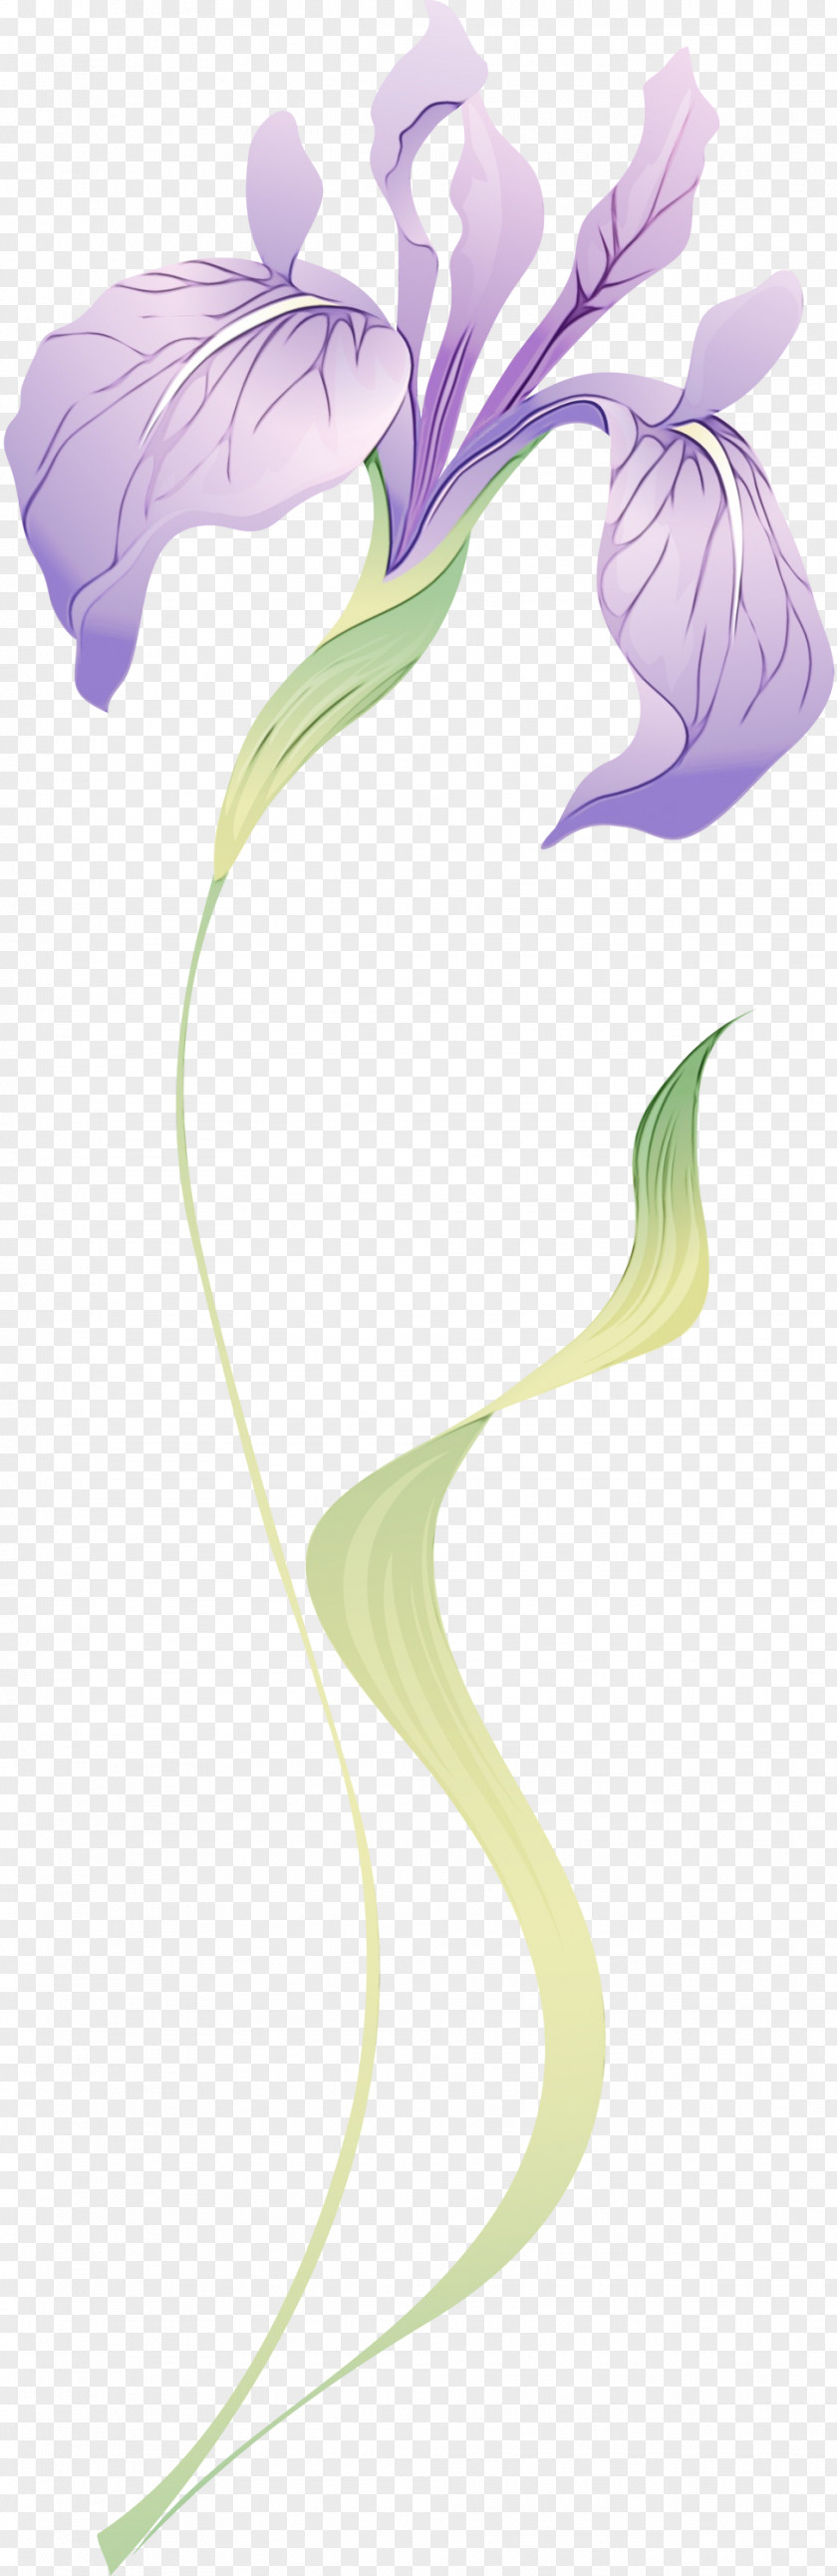 Arum Family Alismatales Giant White Lily Plant Flower Anthurium PNG